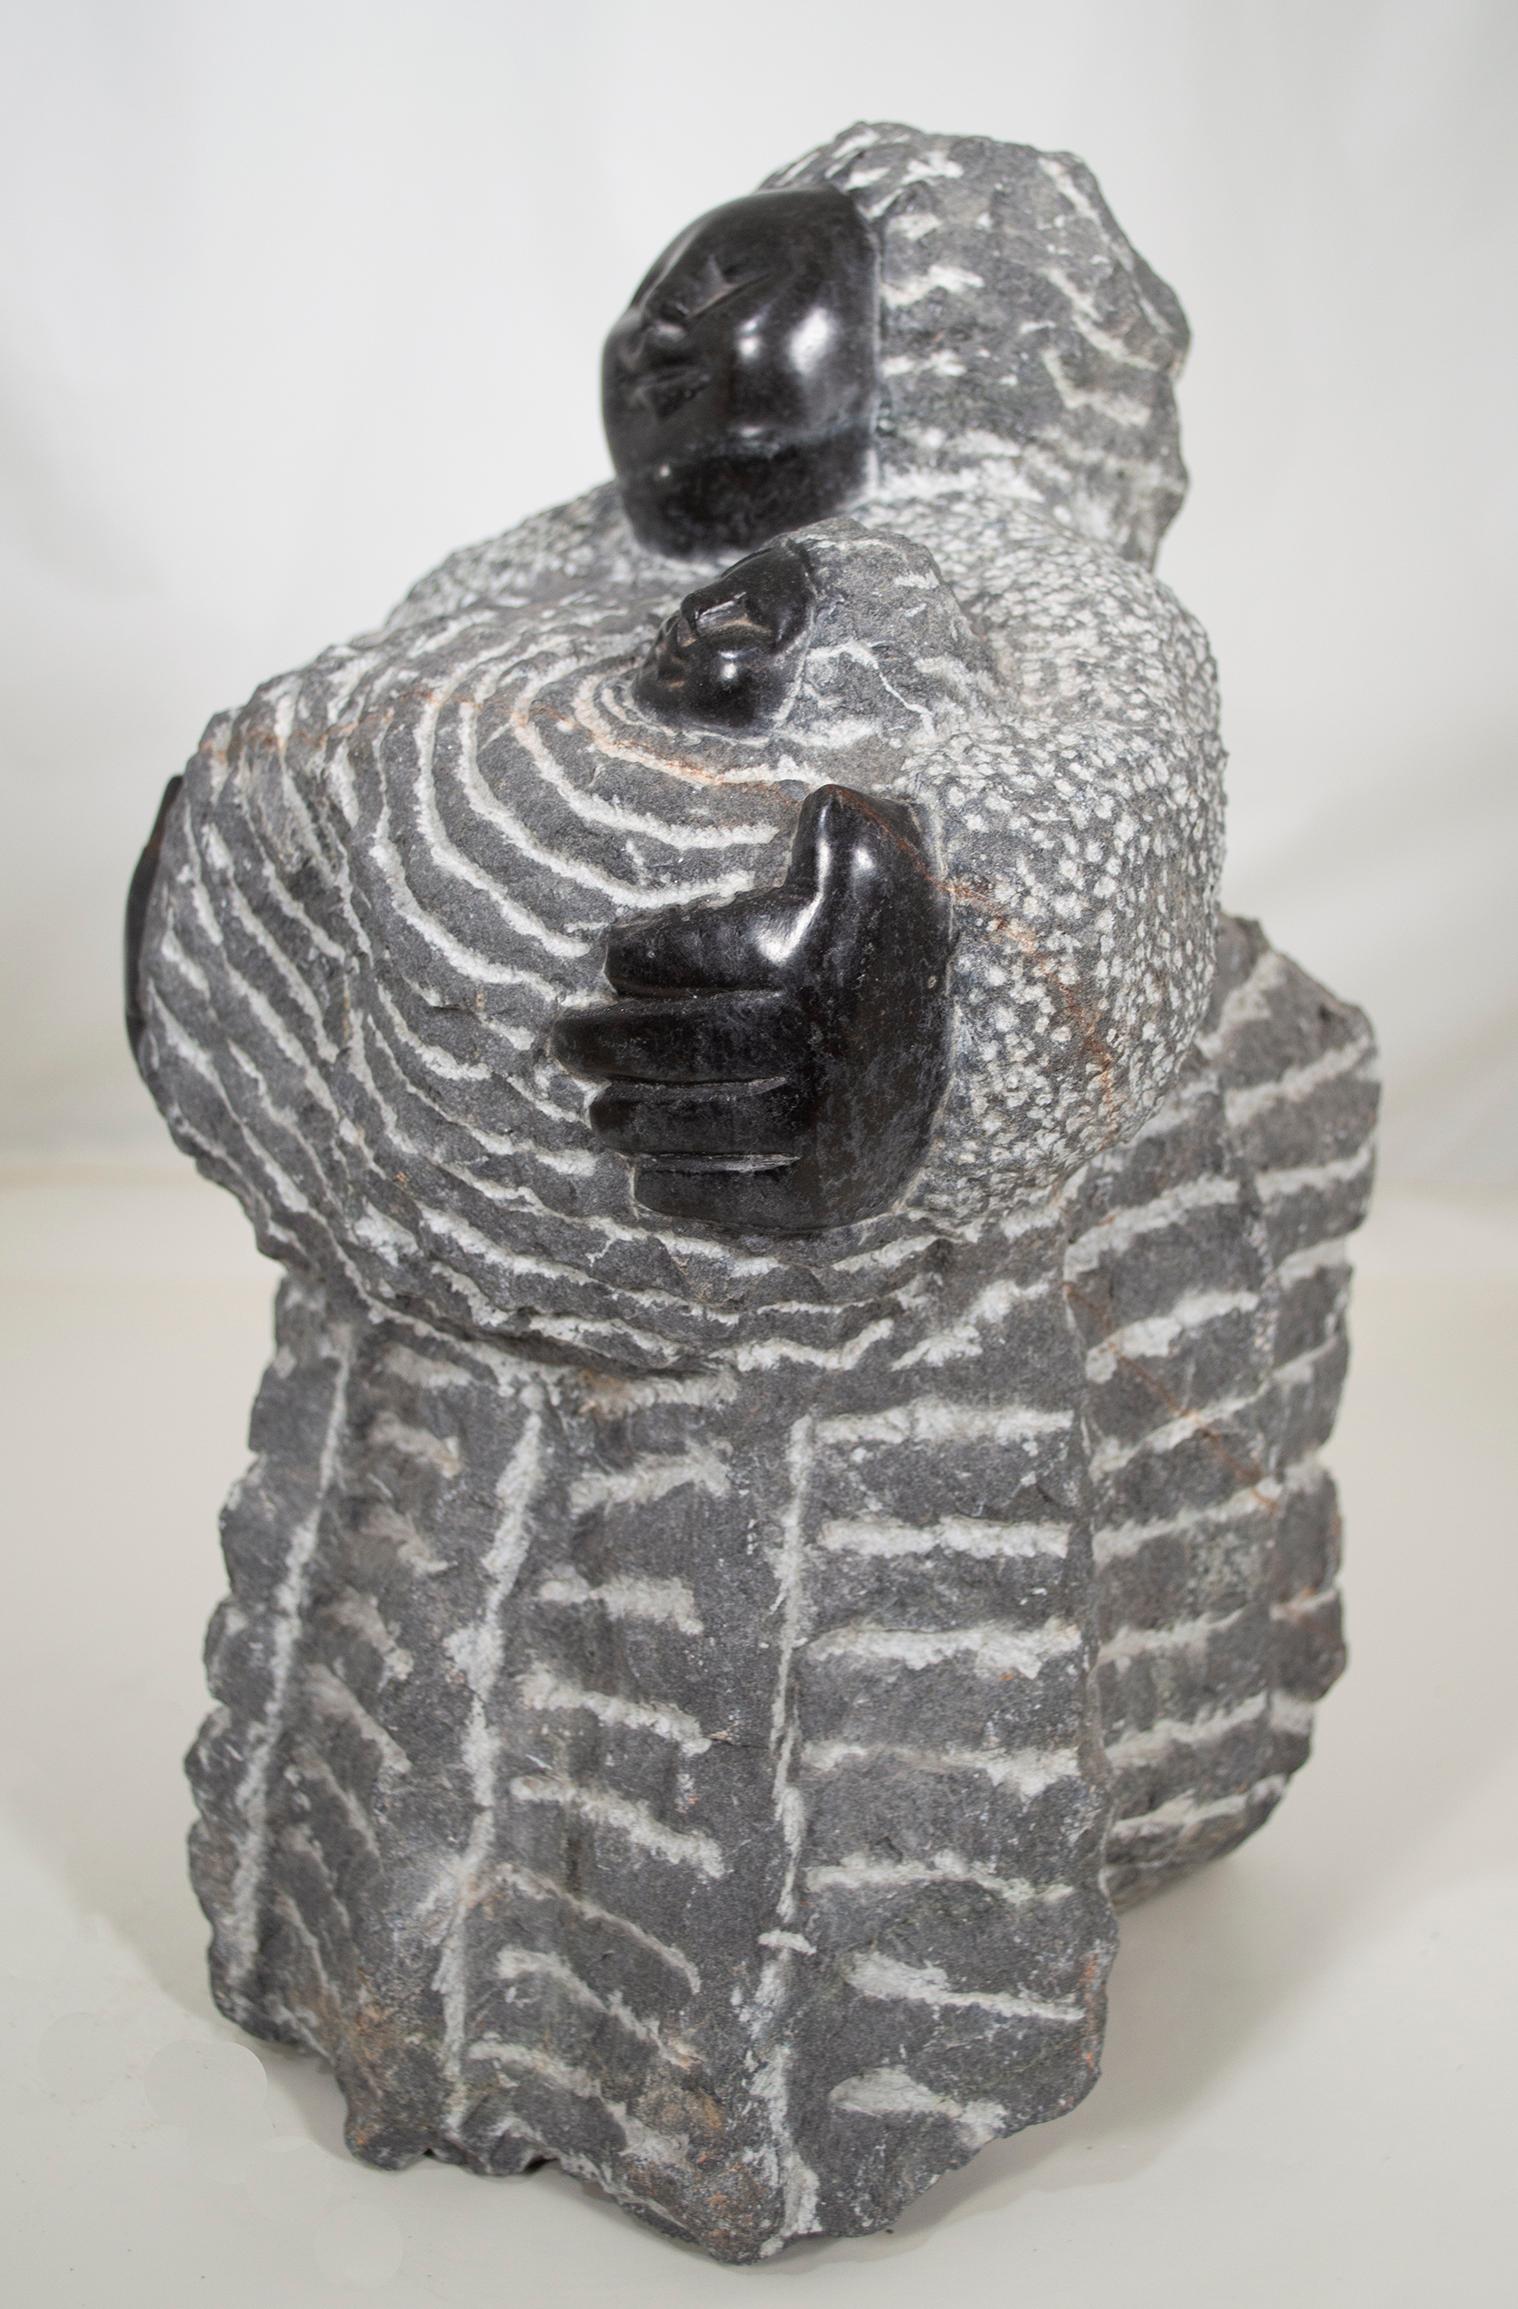 'Grandmother With Her Granddaughter' is an original black serpentine sculpture by the celebrated second generation Shona artist Colleen Madamombe. The sculpture presents a character common to Madamombe's work: a woman with a round face and wearing a